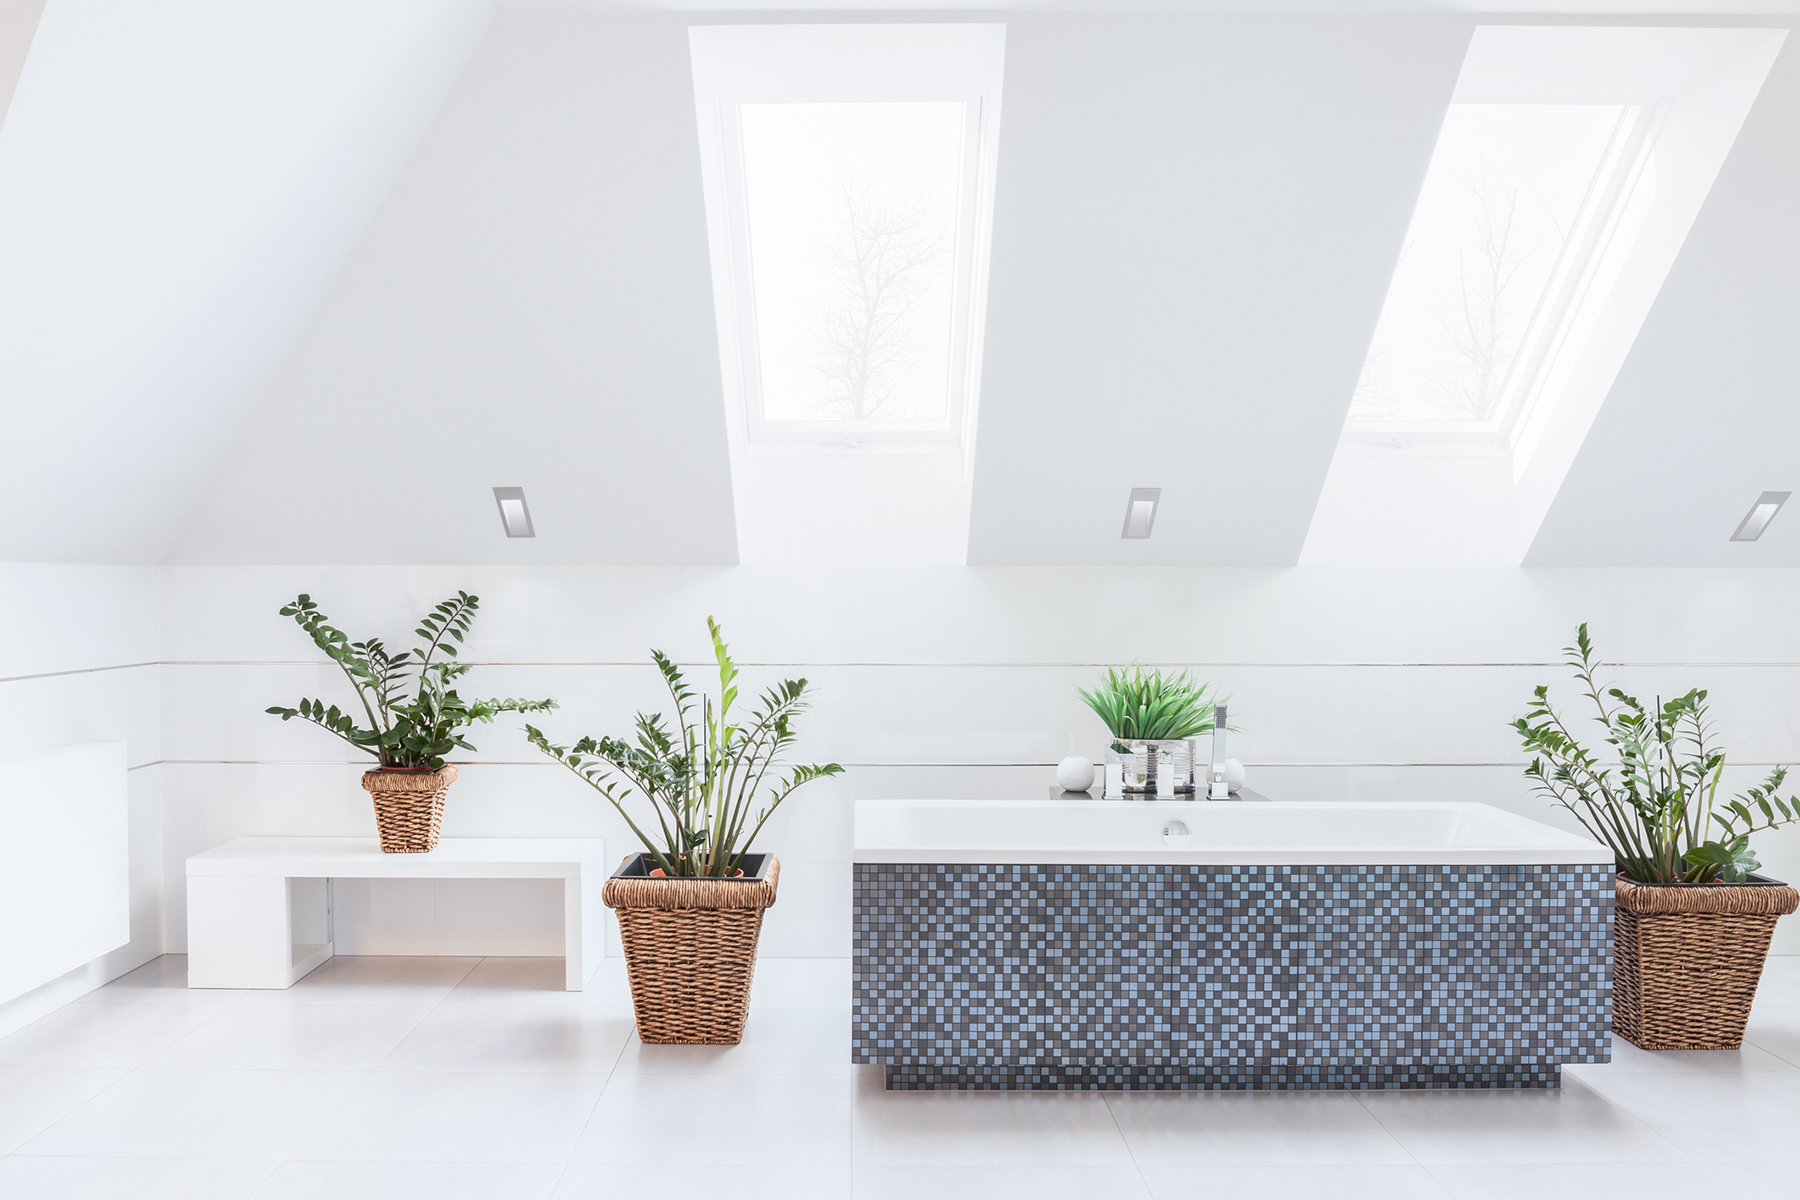 What are the best plants for the bathroom?